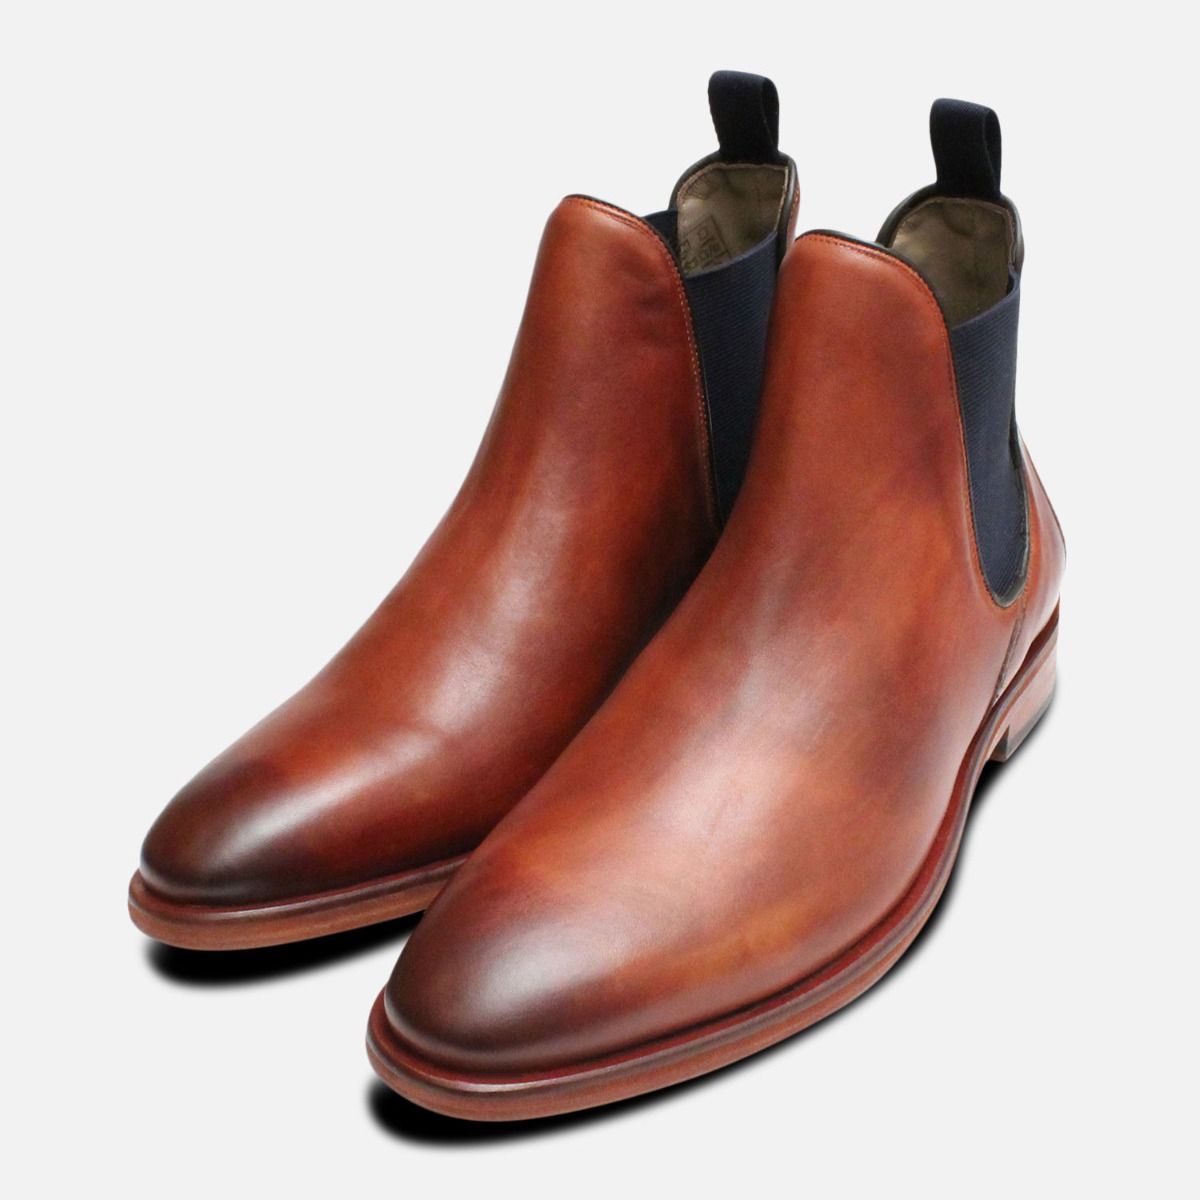 oliver sweeney boots sale